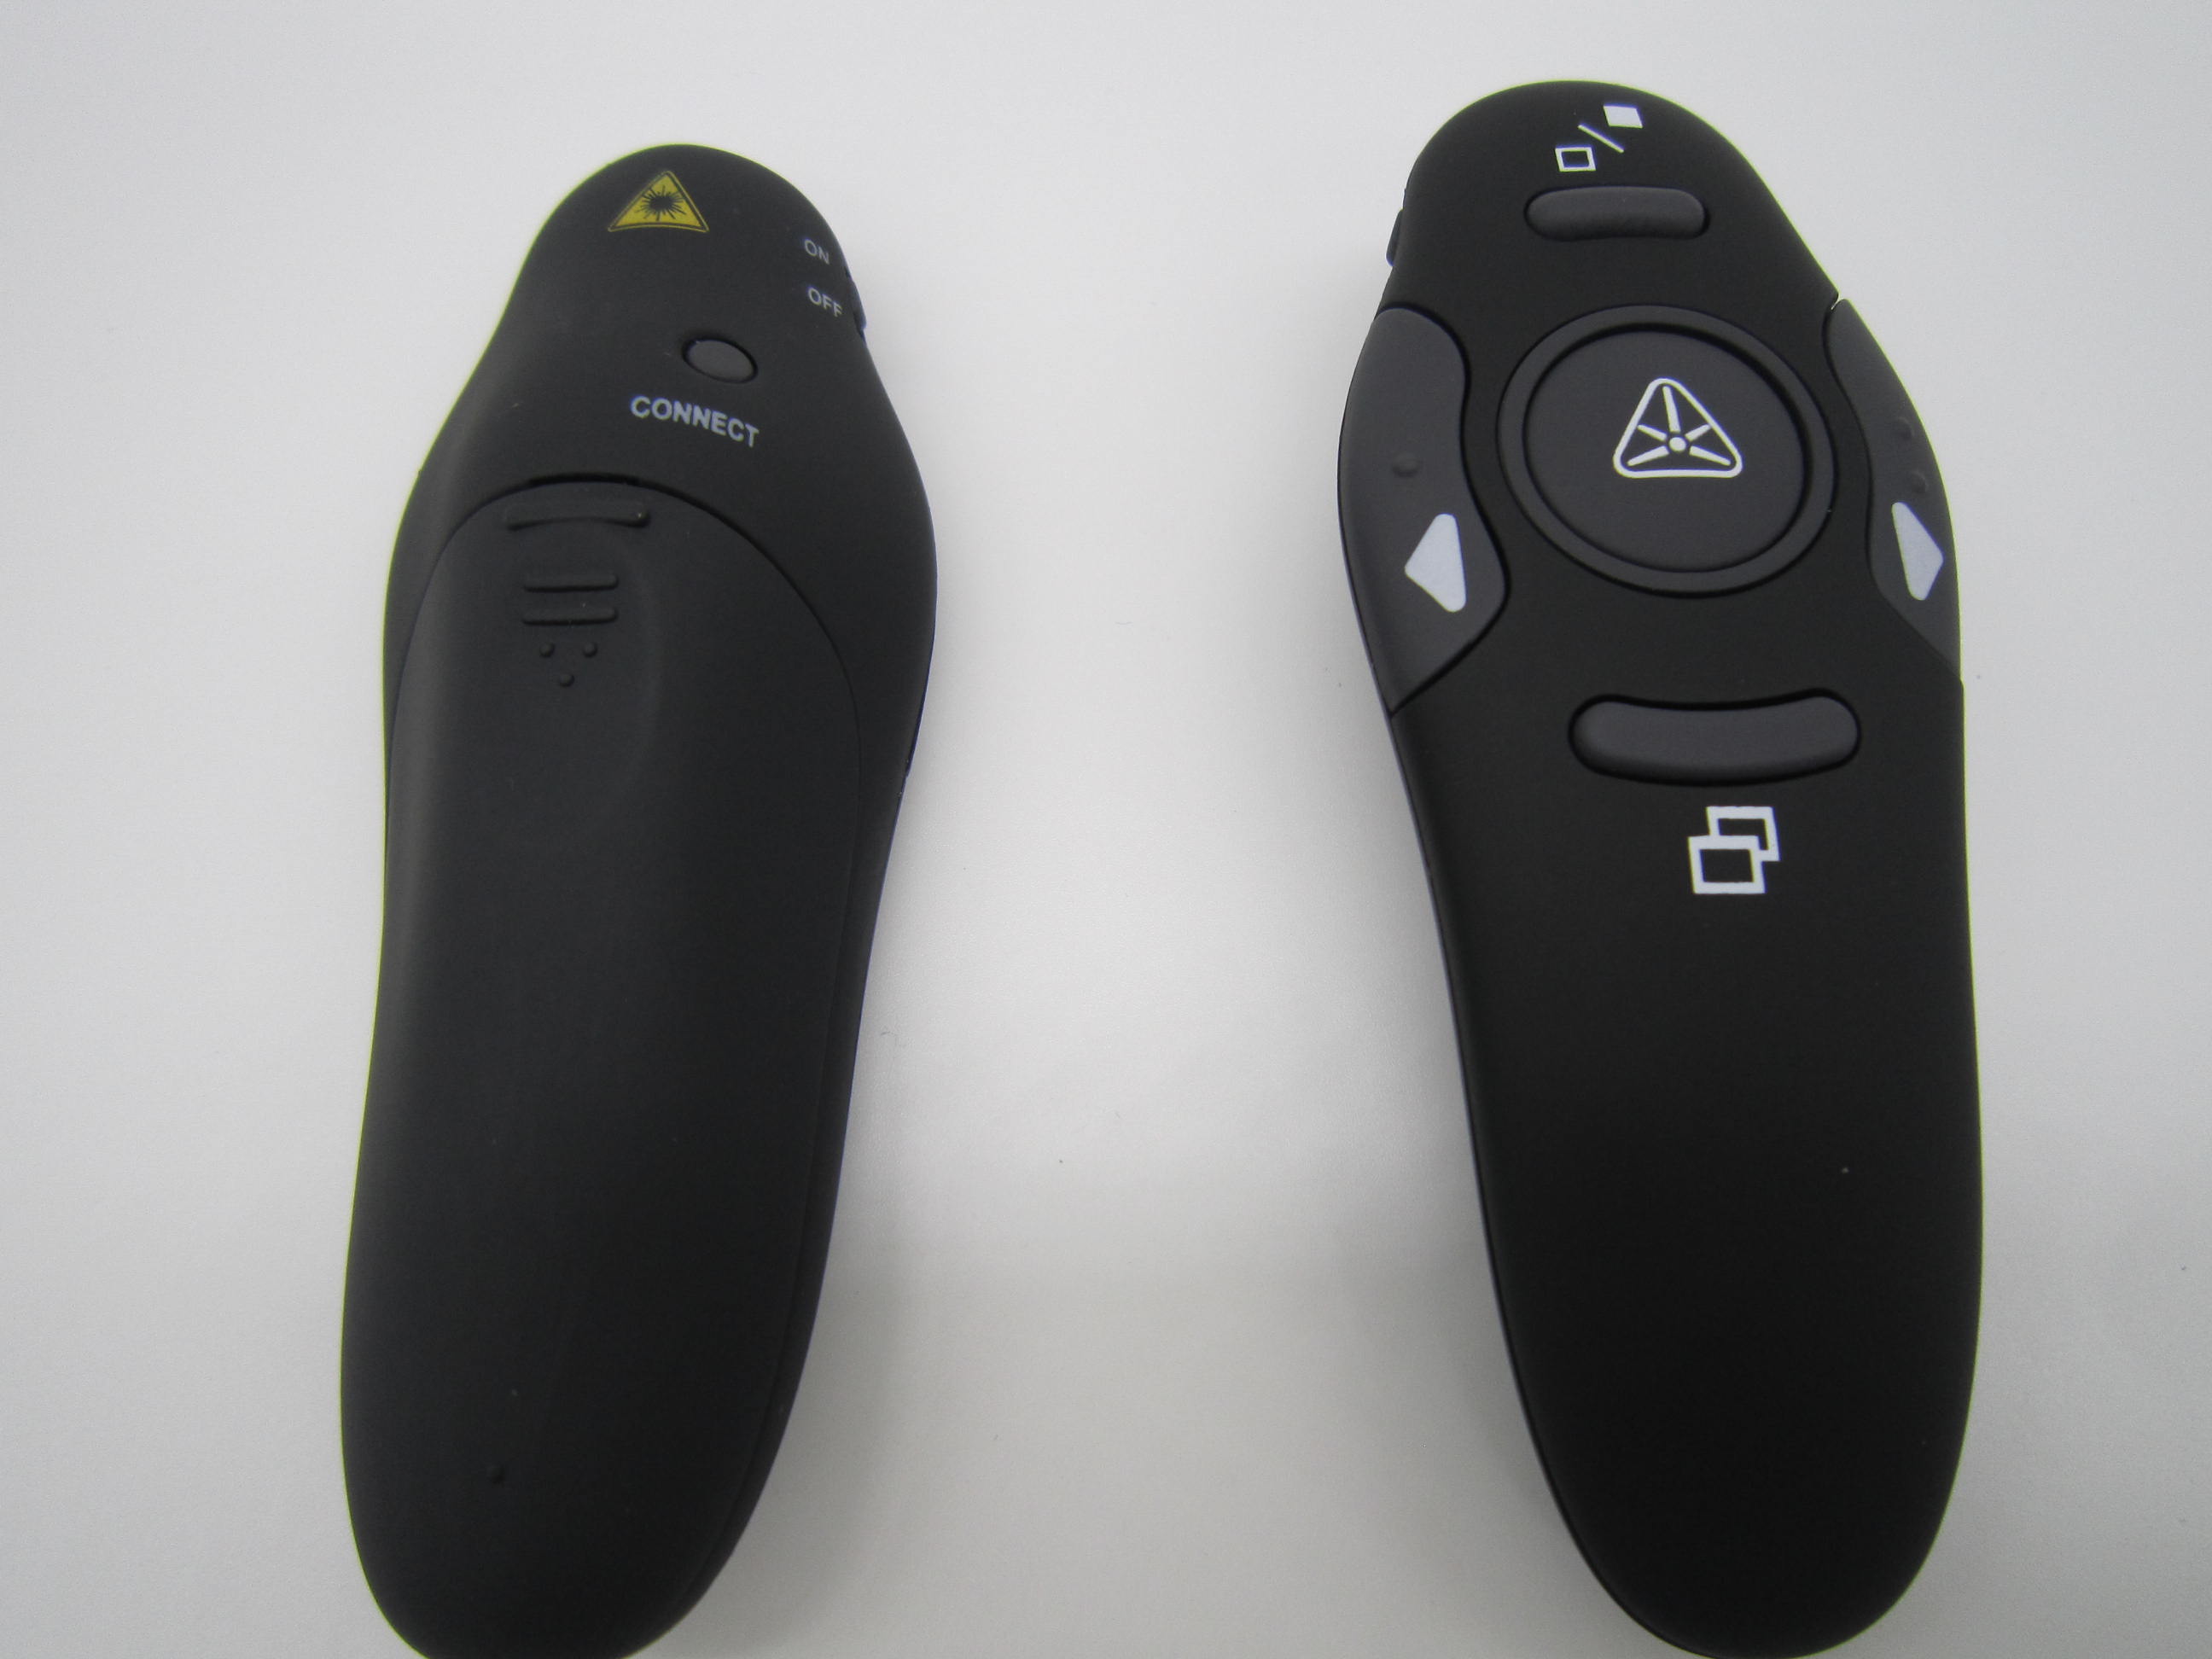 HDW-RS013 Wireless presenter with laser pointer